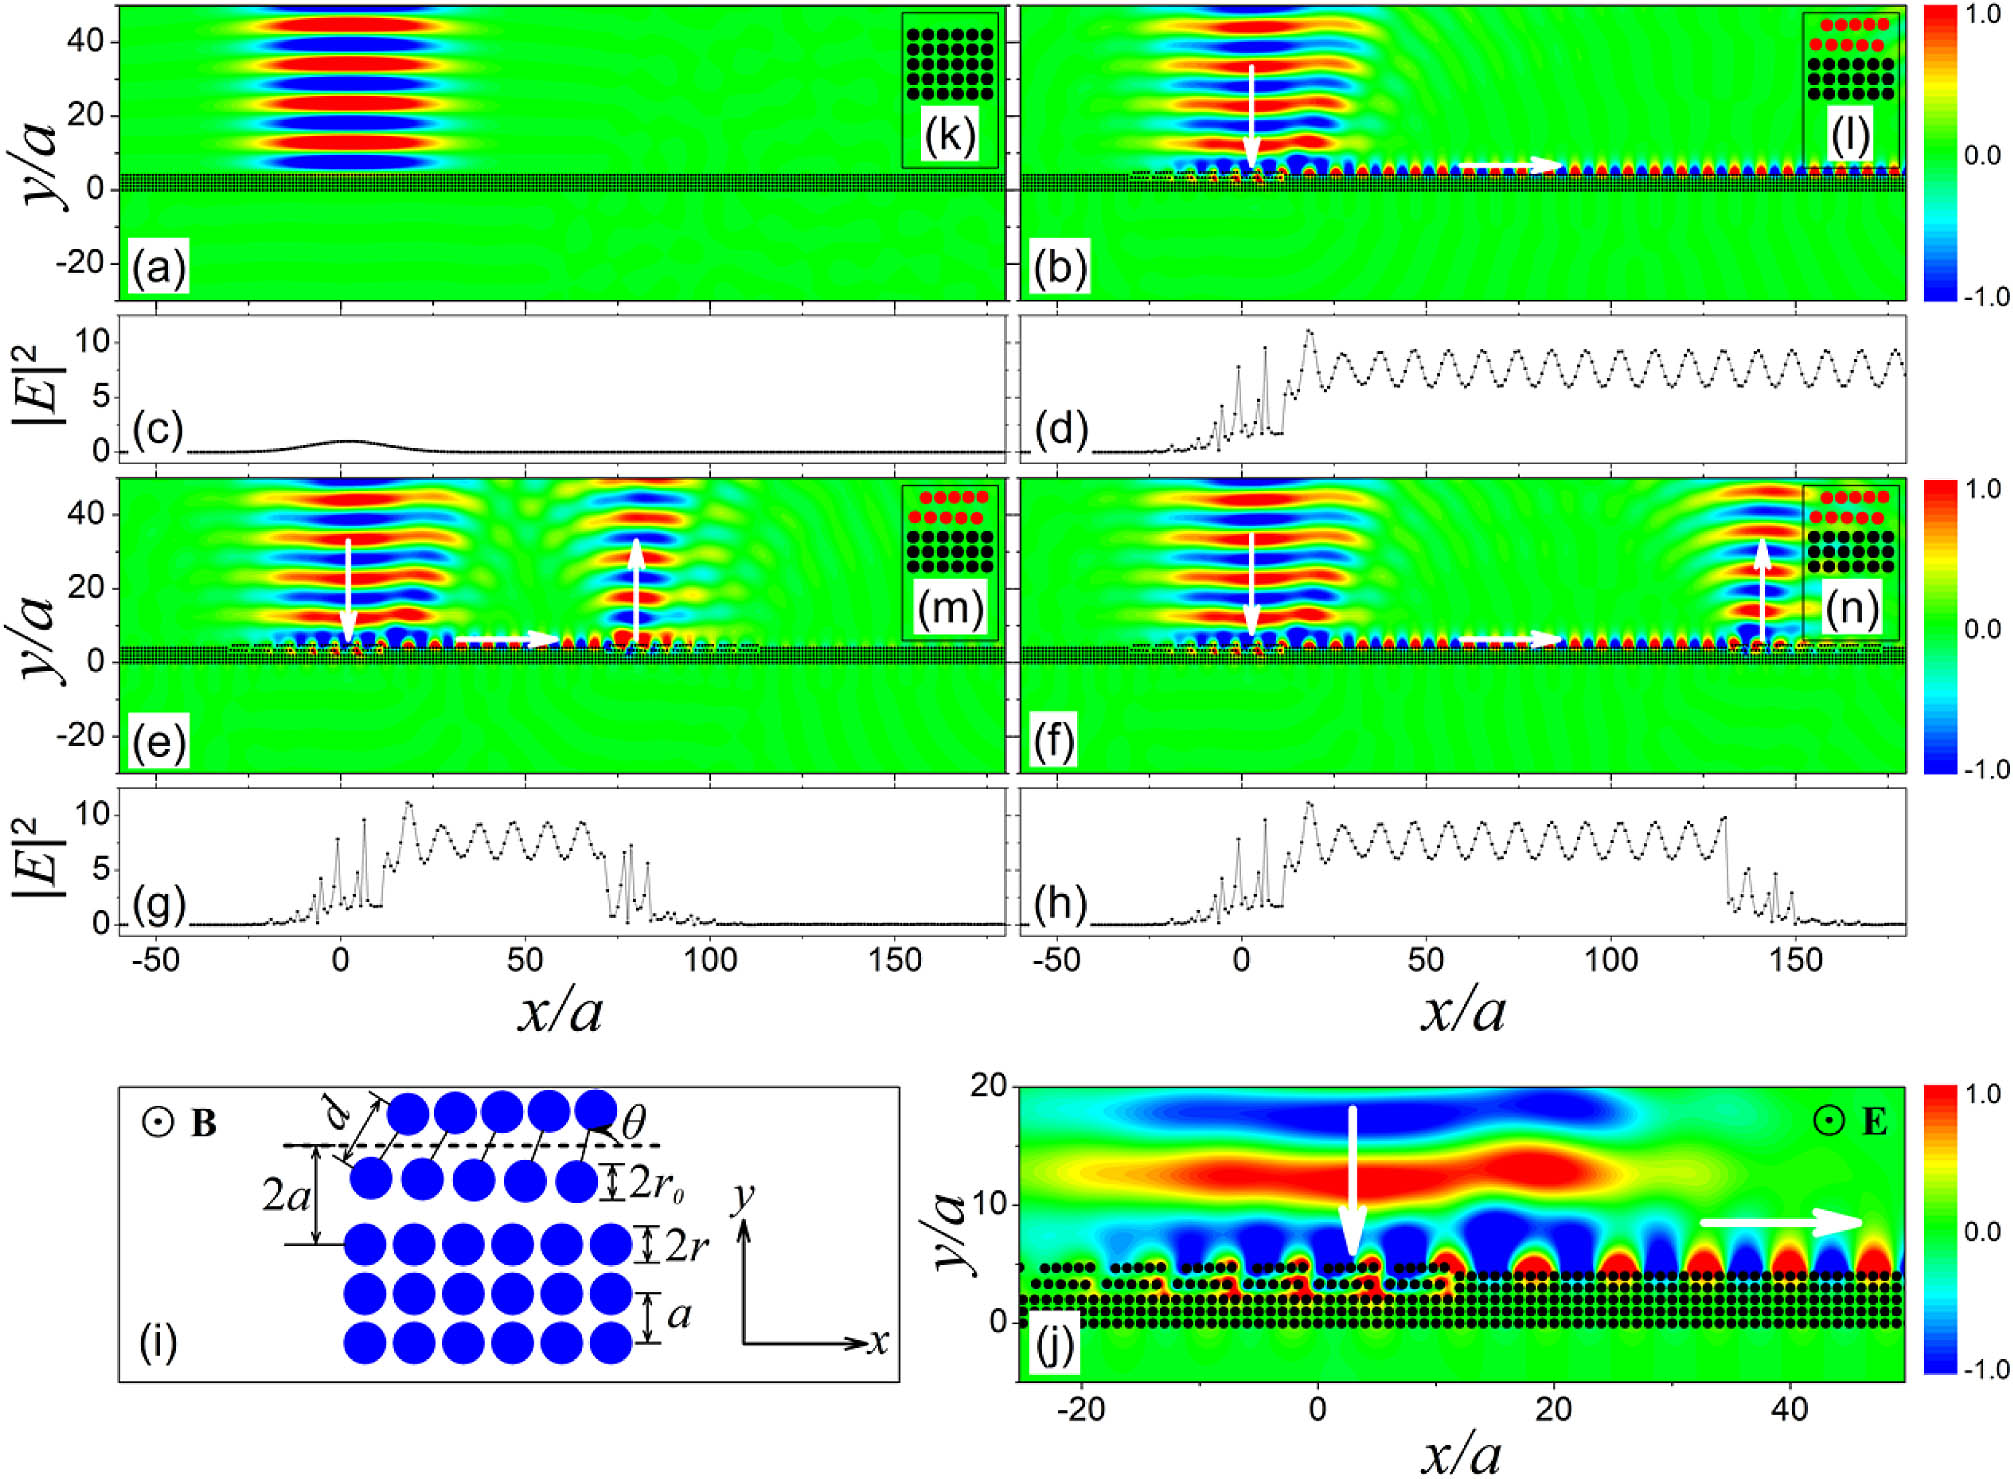 Electric-field patterns for a transverse magnetic (TM) Gaussian beam incident normally on the surface of a five-layer slab composed of an array of ferrite rods in (a) a square lattice and with the upmost two layers of the slab in the illuminated region replaced by a magnetic plasmonic GMS with the unit cell containing (b), (e), (f) five pairs of rod dimers. The field intensity profiles close to the interface are shown in (c), (d), (g), (h), corresponding to (a), (b), (e), (f). (i) Schematic of the unit cell, in which the structure size and the direction of the magnetic field are marked. (j) Amplified view of the near-field map of the connection area between the excitation region and propagation region of the edge modes, in which the electric-field direction of the incident wave is marked. (k)–(n) Unit cells for the corresponding slabs, among which (l)–(n) are the same. The operating frequency is 4.72 GHz, and the bias magnetic field is applied such that H0=530 Oe.